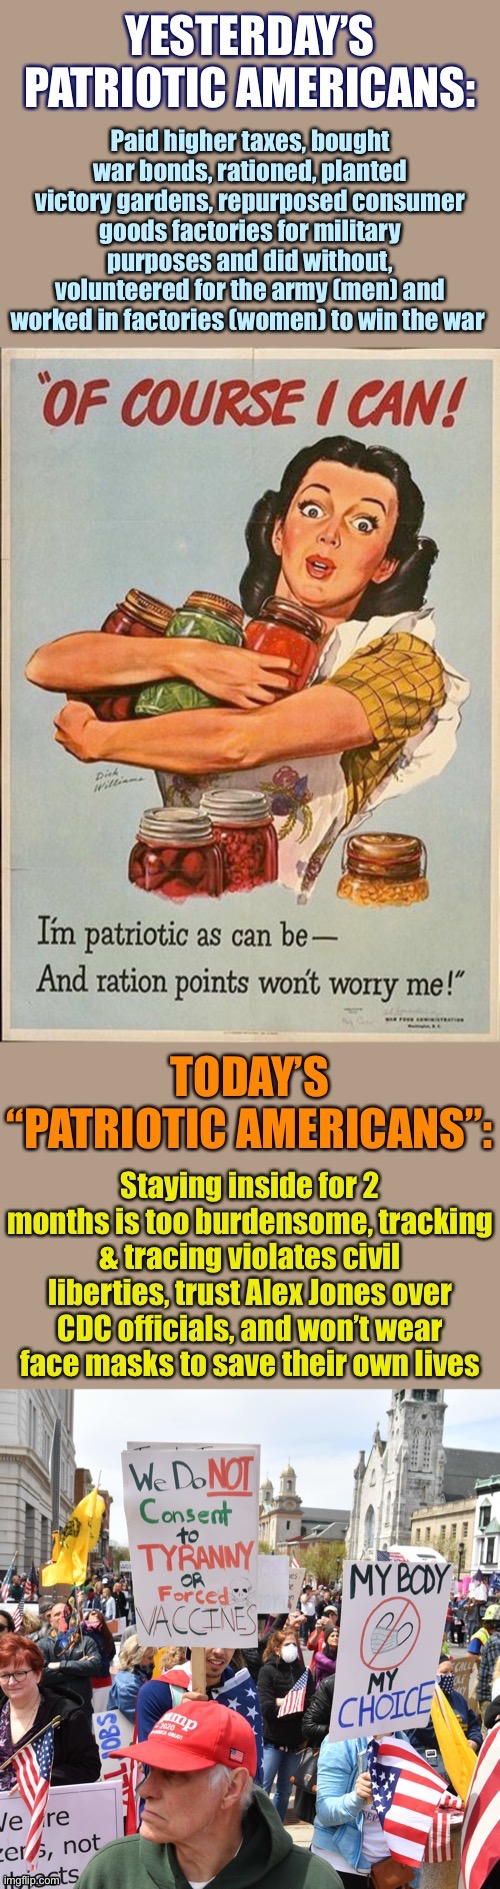 When they want to "make America great again" but have no clue and won't put in the work | image tagged in maga,covid-19,world war ii,patriotism,sacrifice,freedom | made w/ Imgflip meme maker